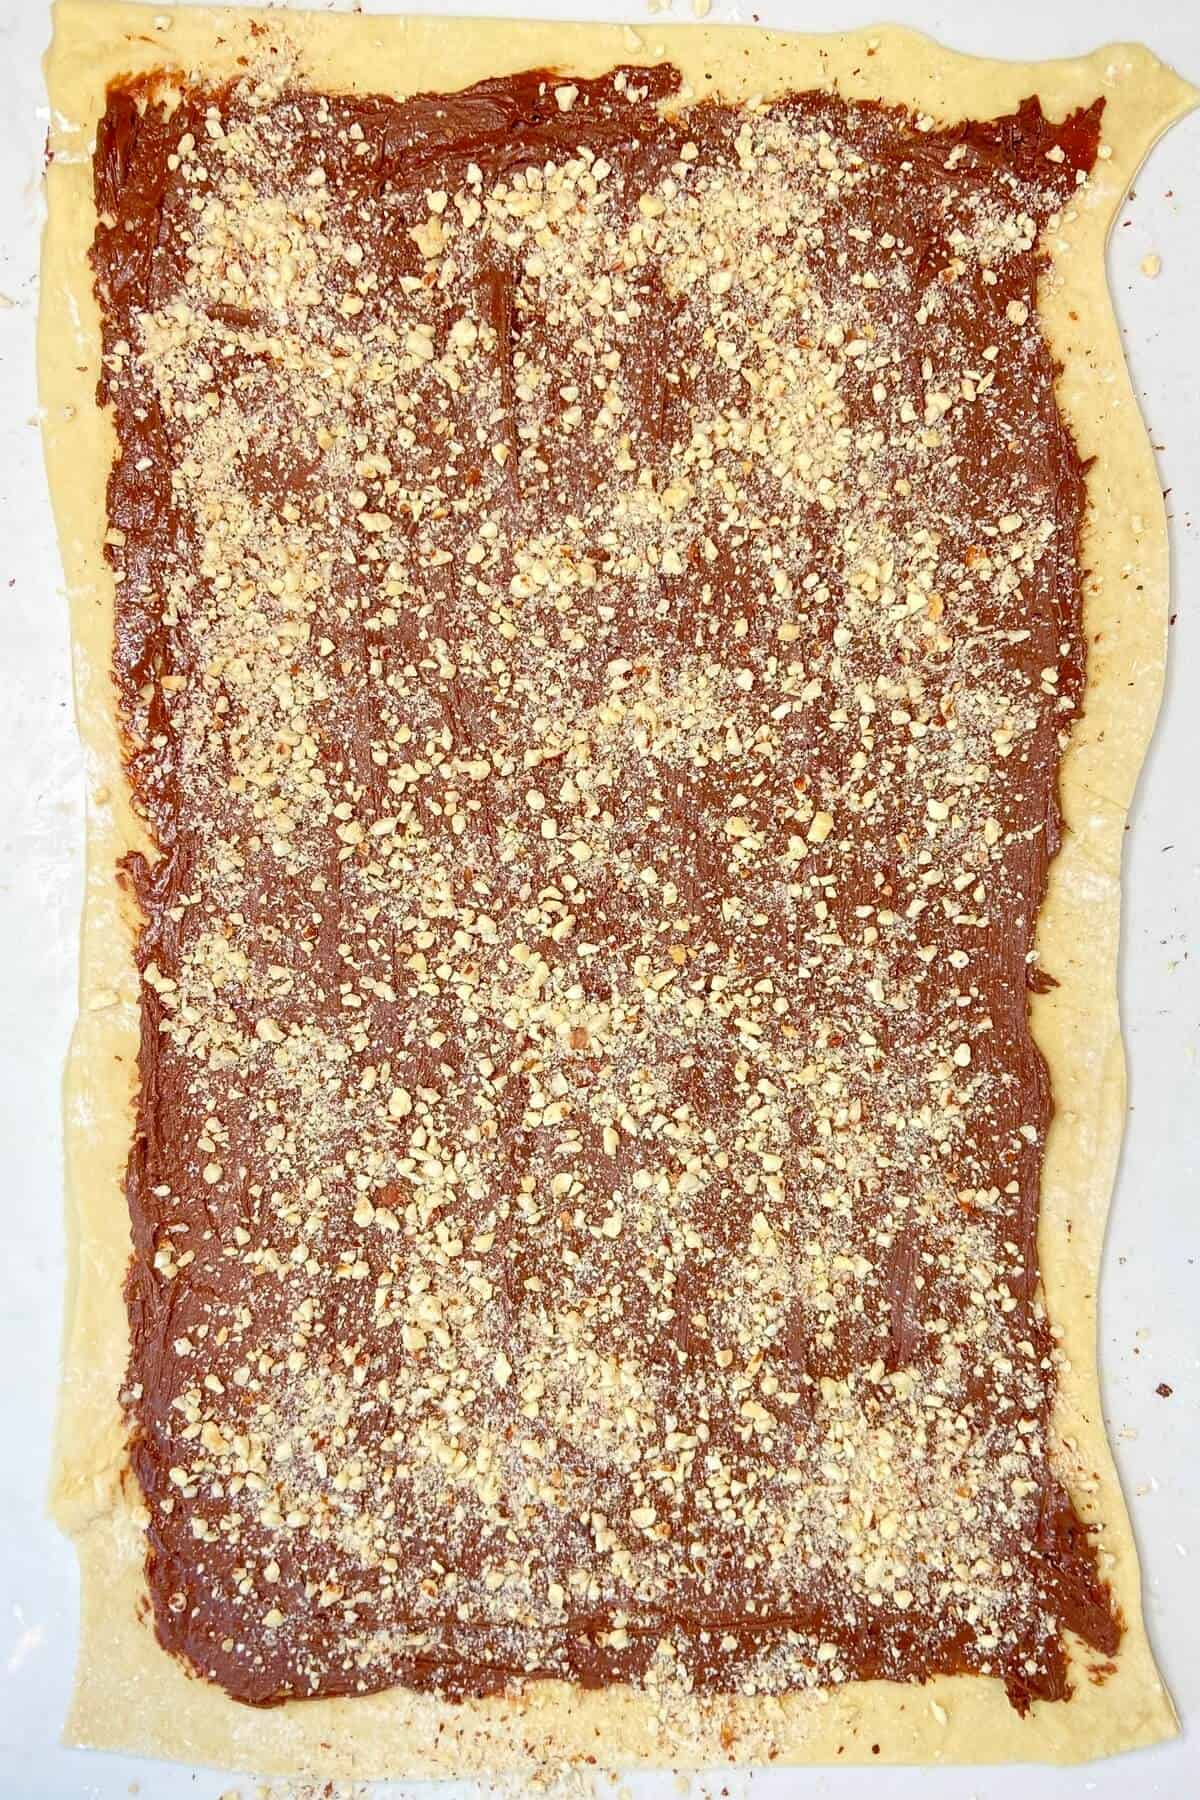 Spread filling and chopped nuts over rolled out dough.